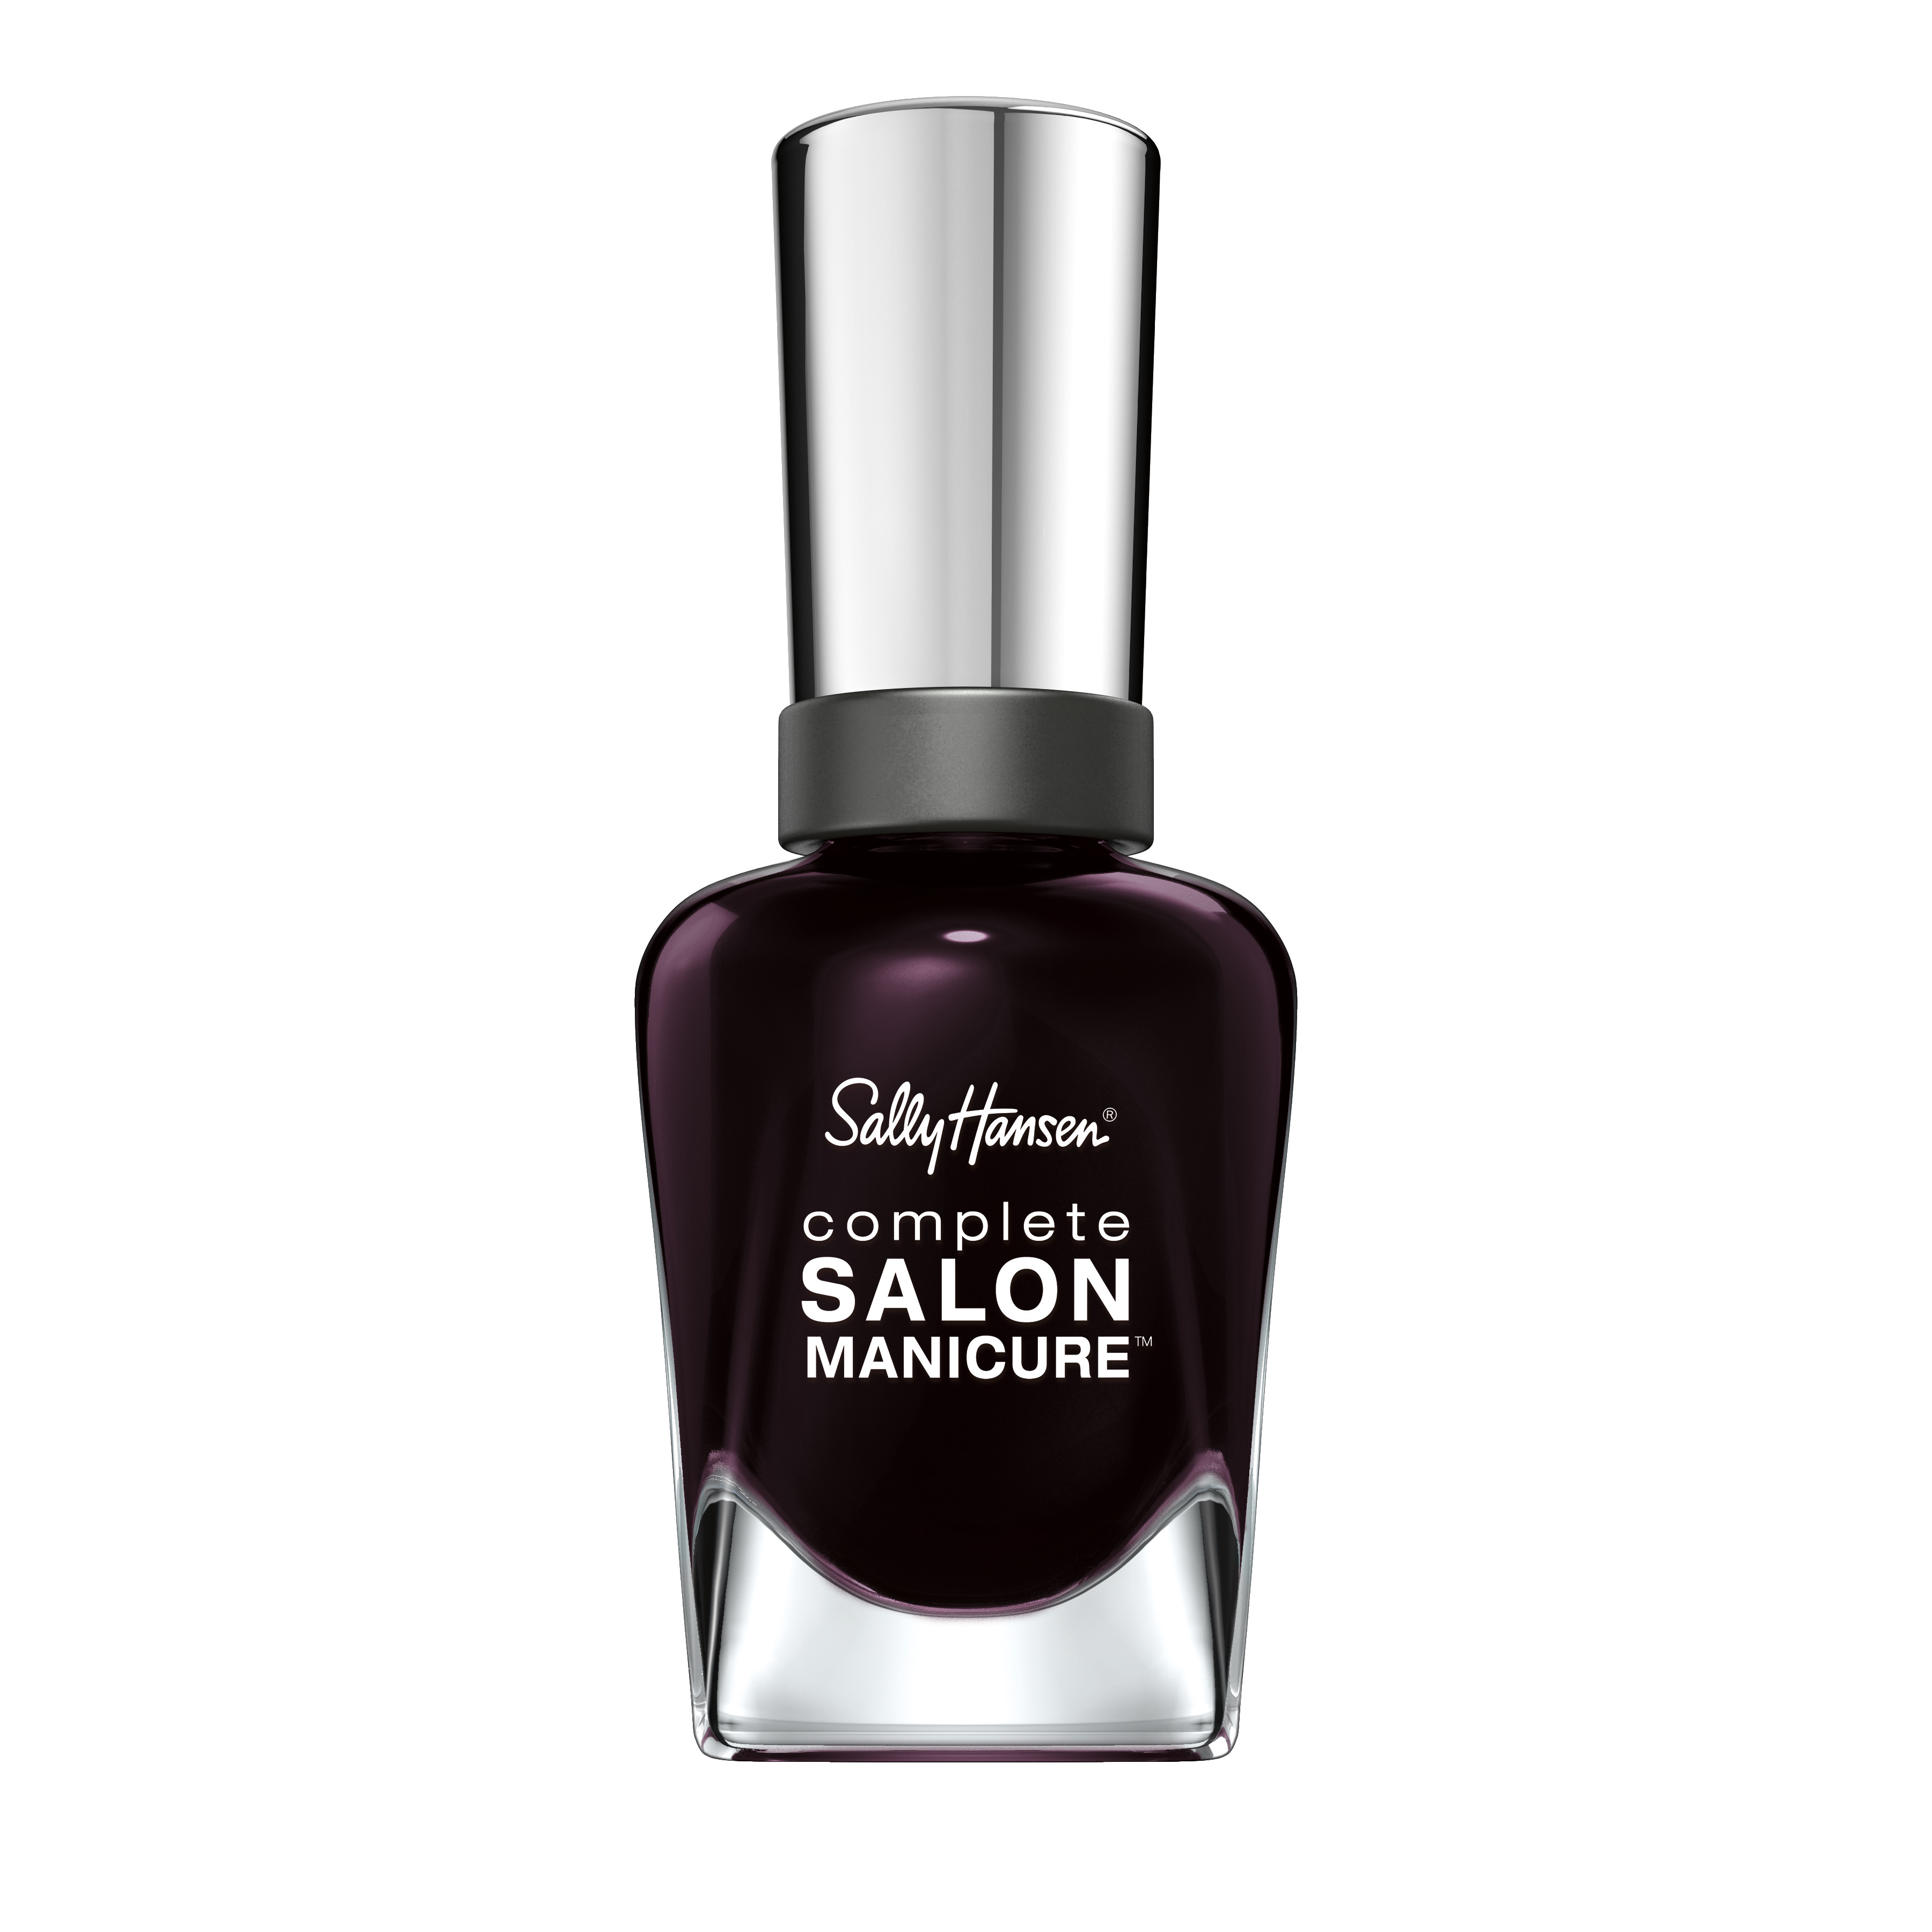 Sally Hansen Complete Salon Manicure Nail Color, Lucky Dress - image 1 of 2